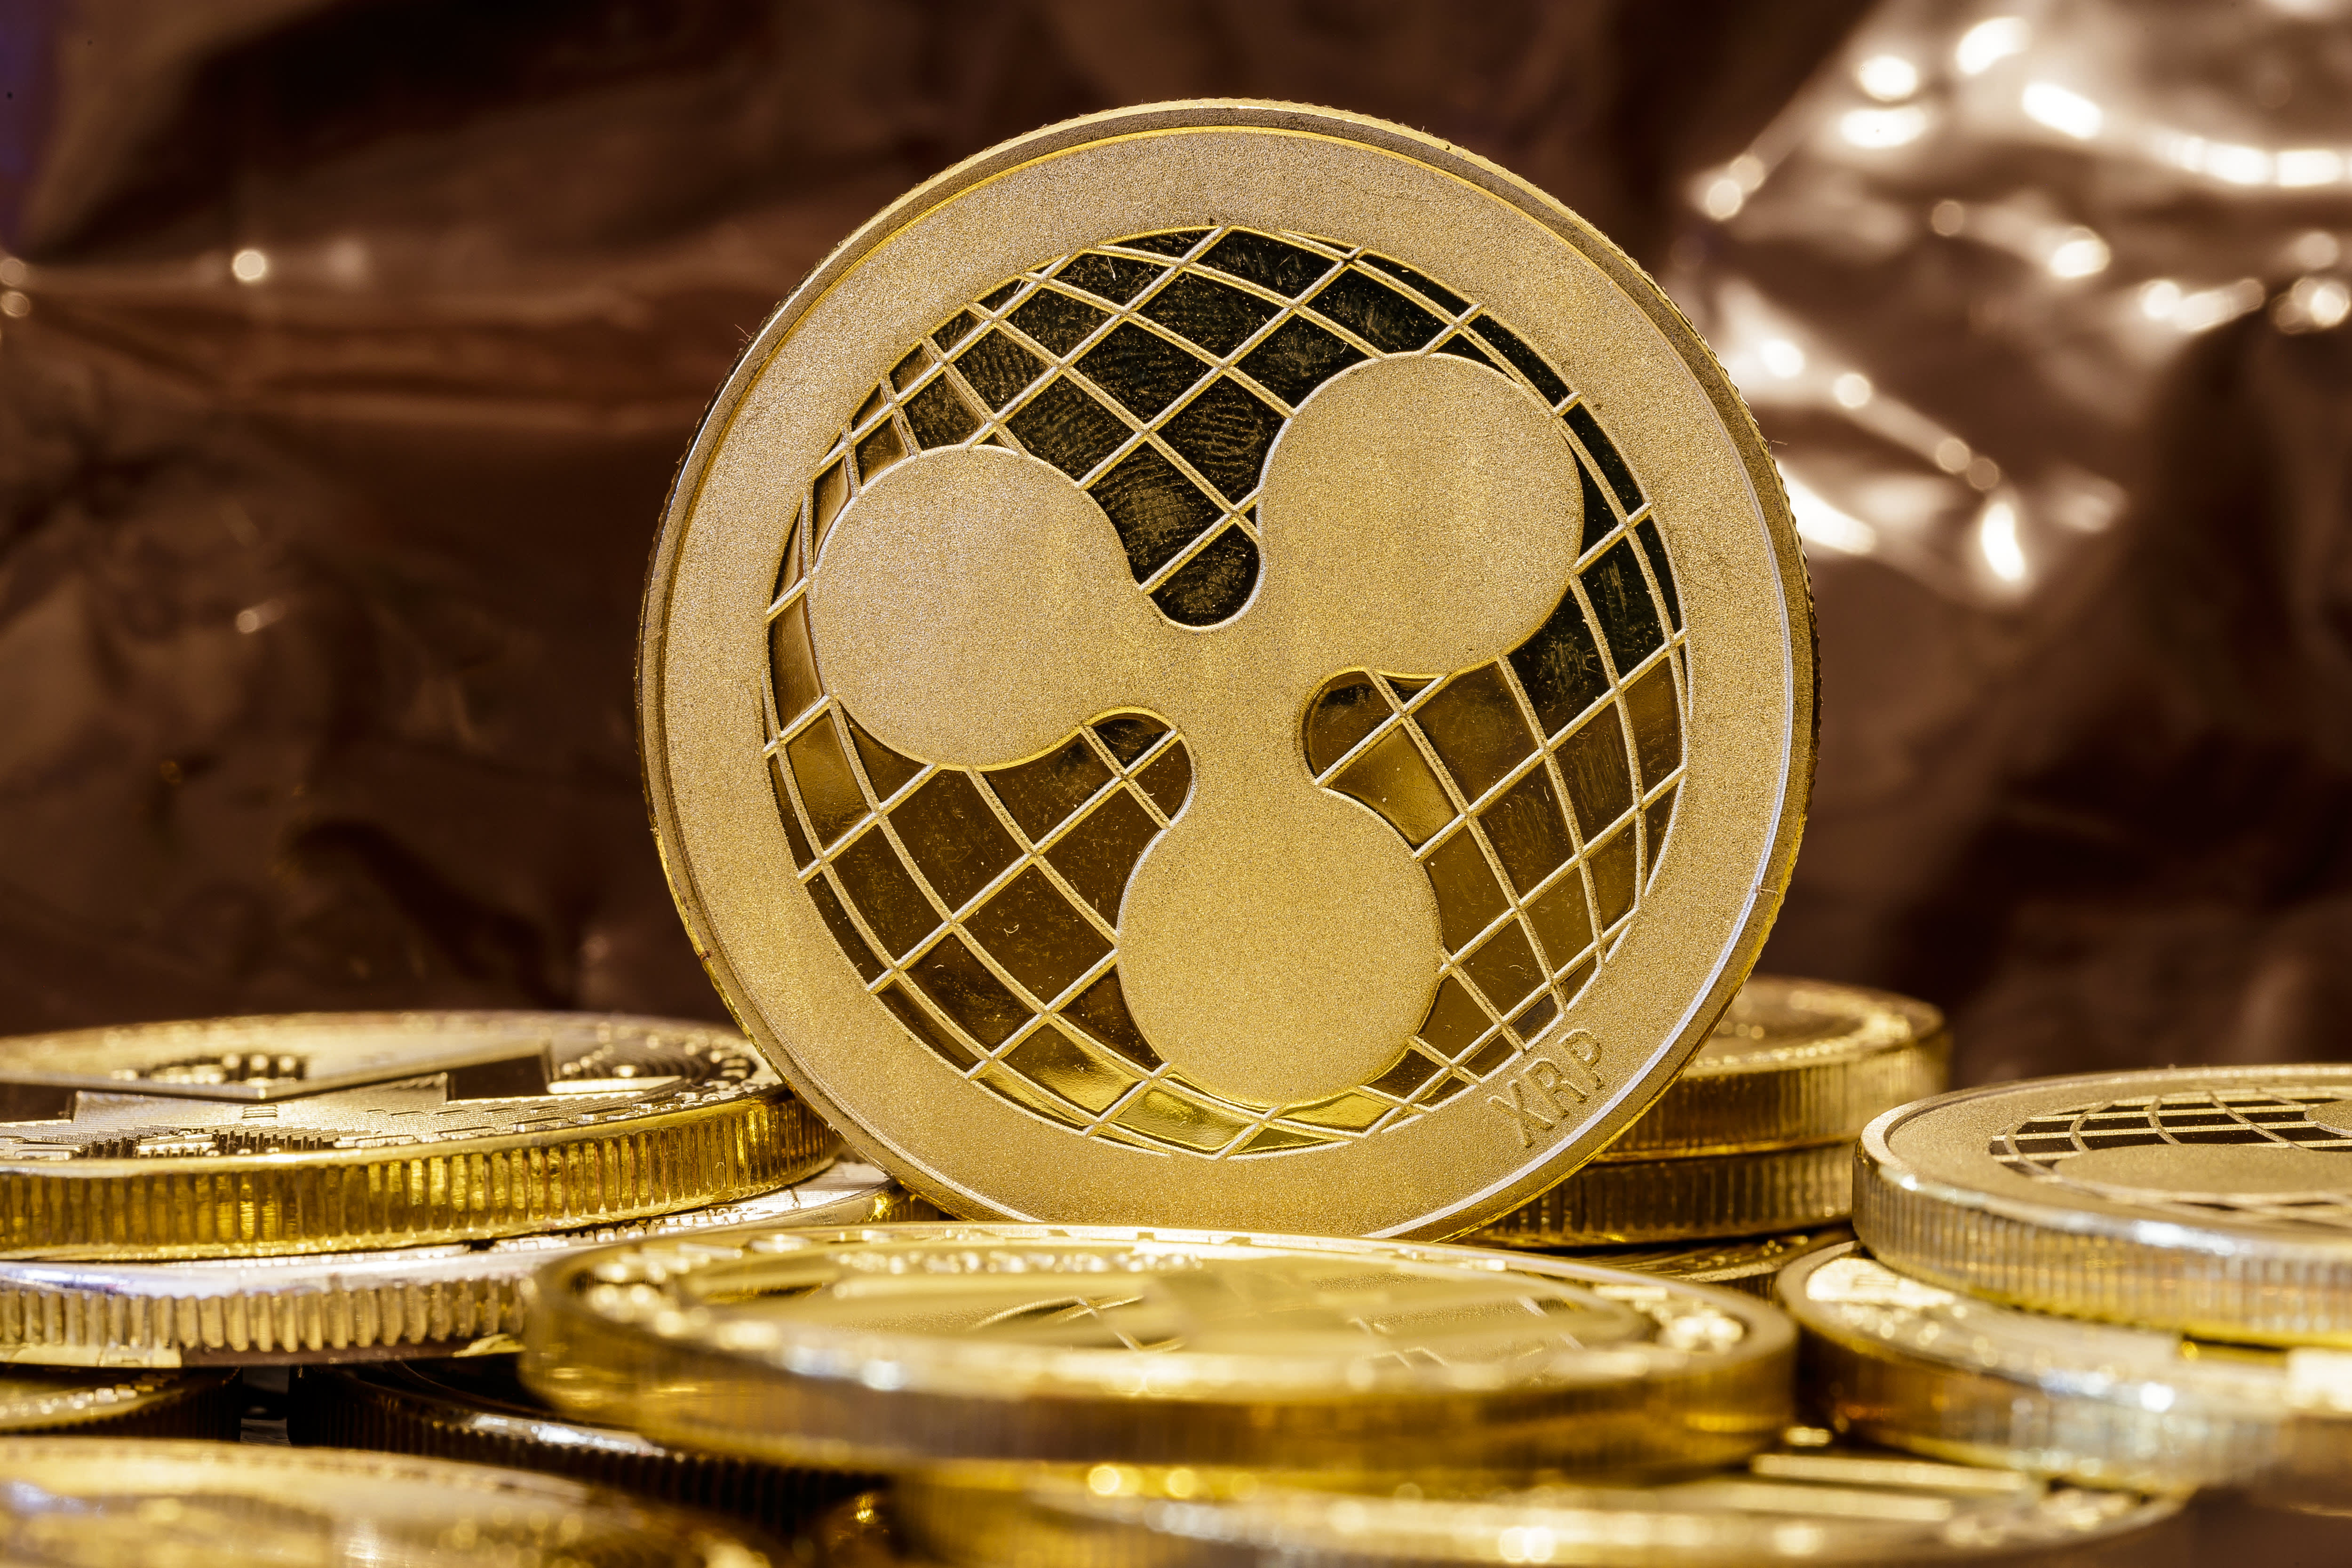 Pundits Say XRP Price is Manipulated, Claiming “Despite All Developments, XRP Not Rising”